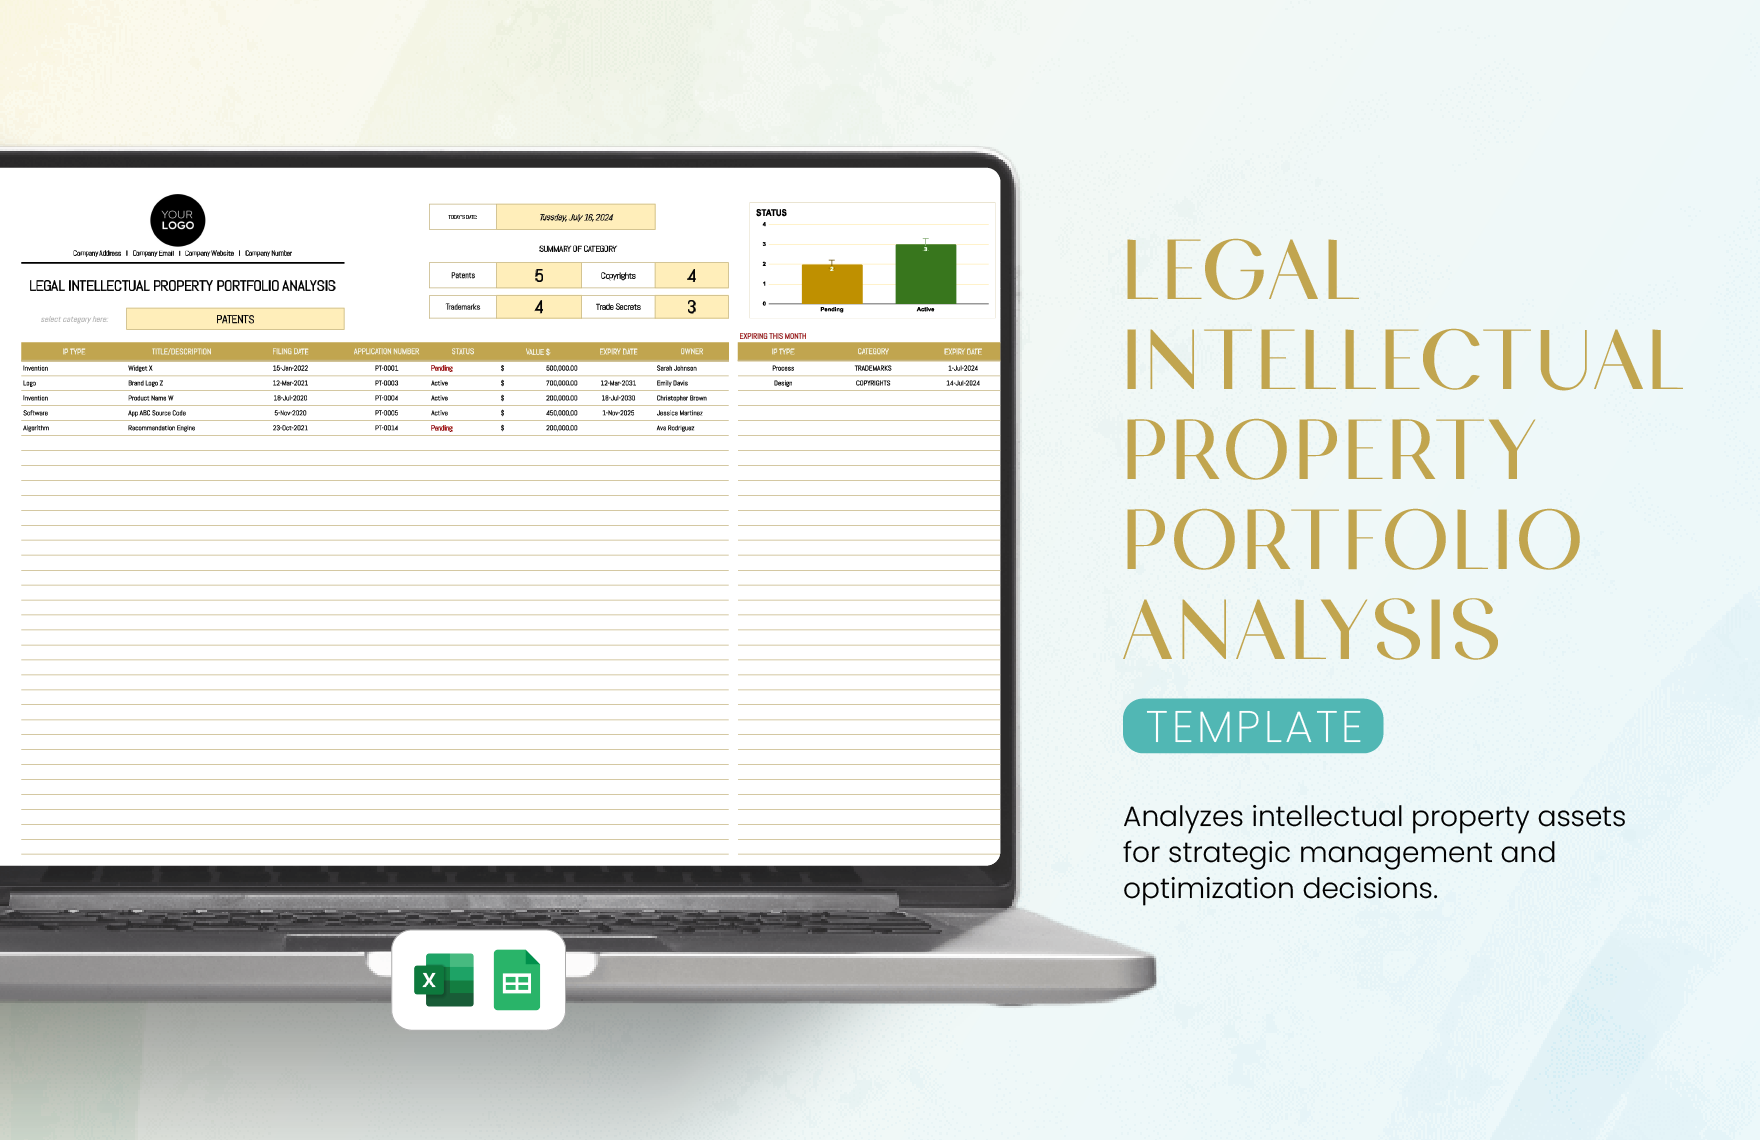 Legal Intellectual Property Portfolio Analysis Template in Excel, Google Sheets